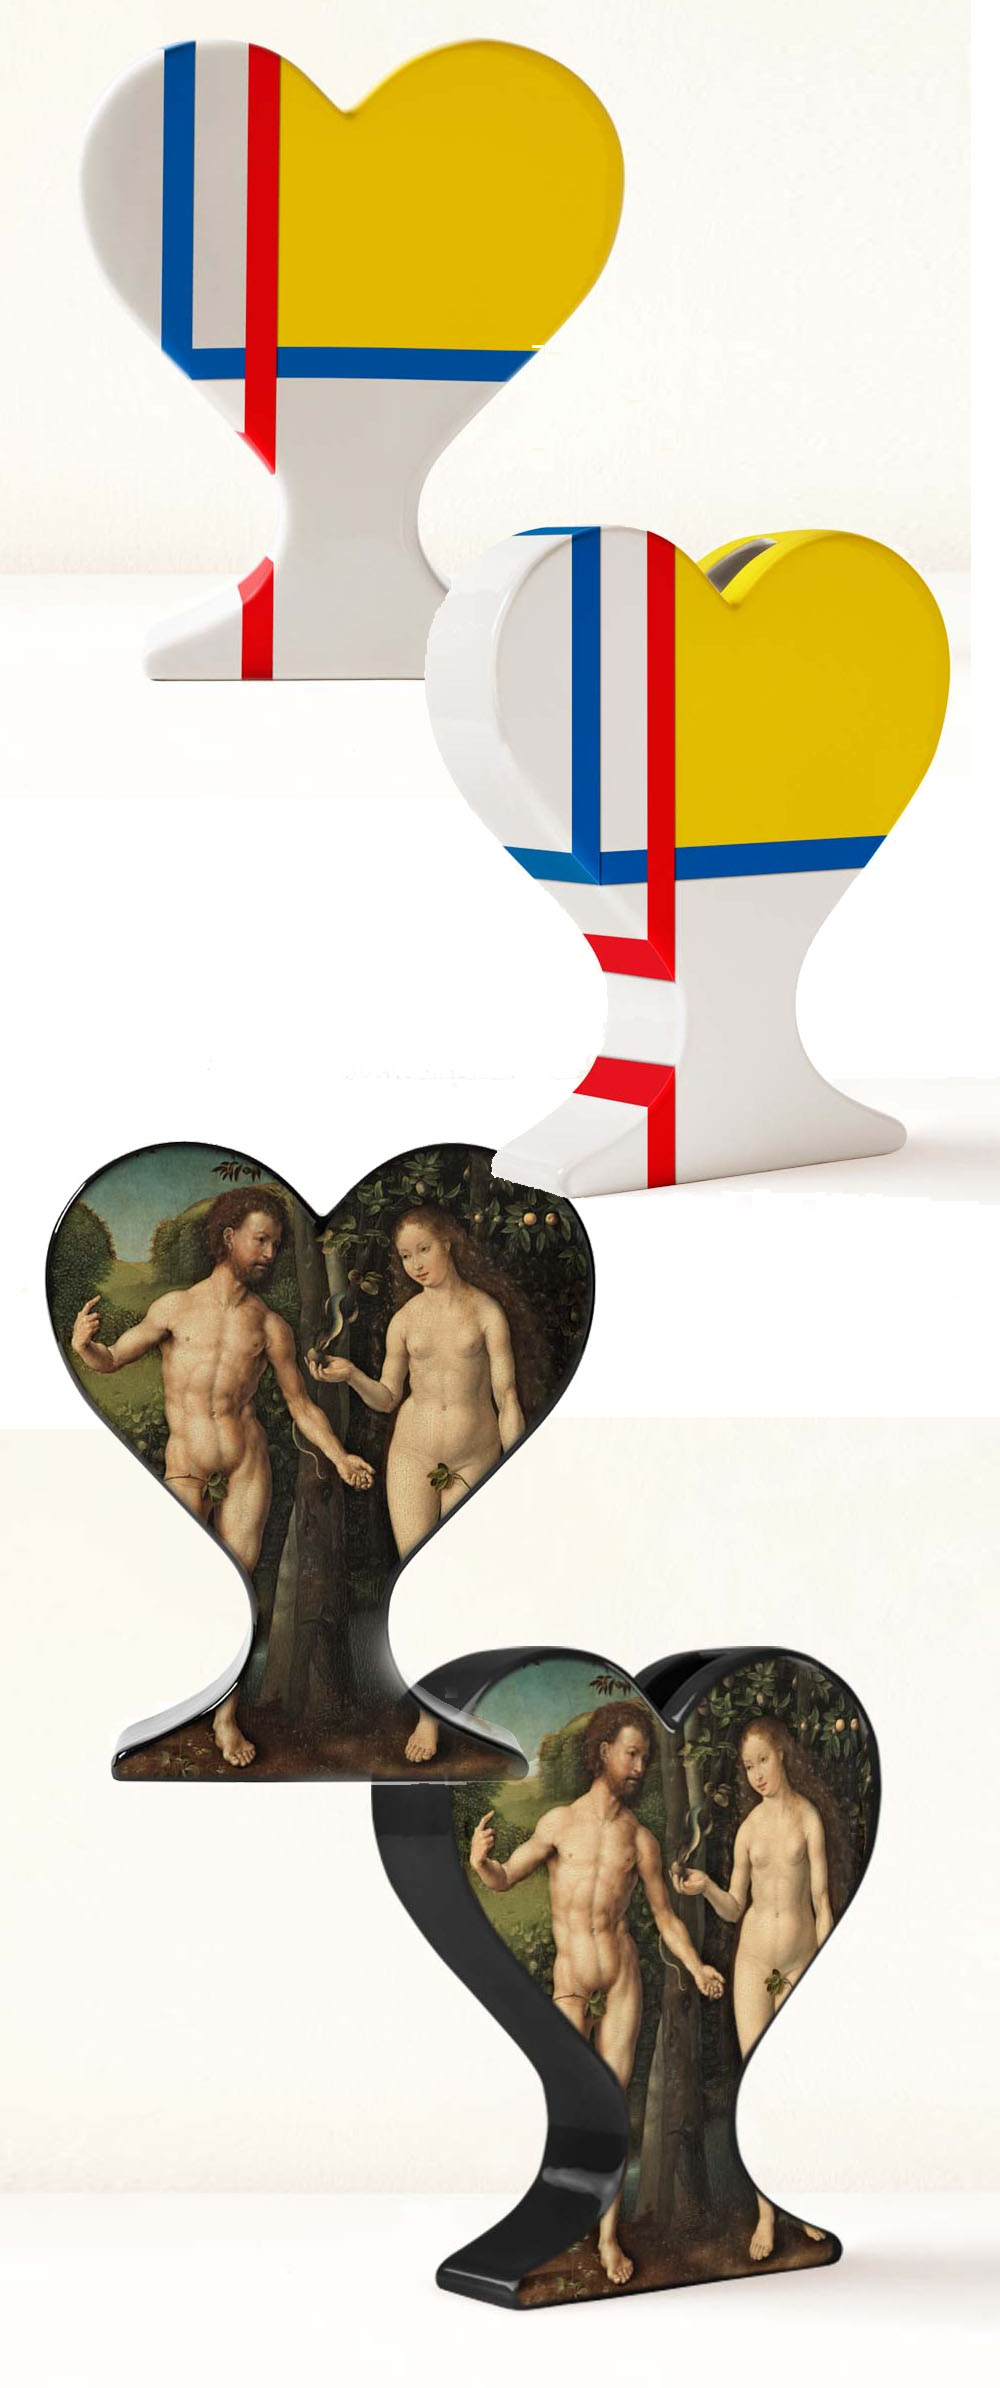 mondrian and adam and eve vases totcor project